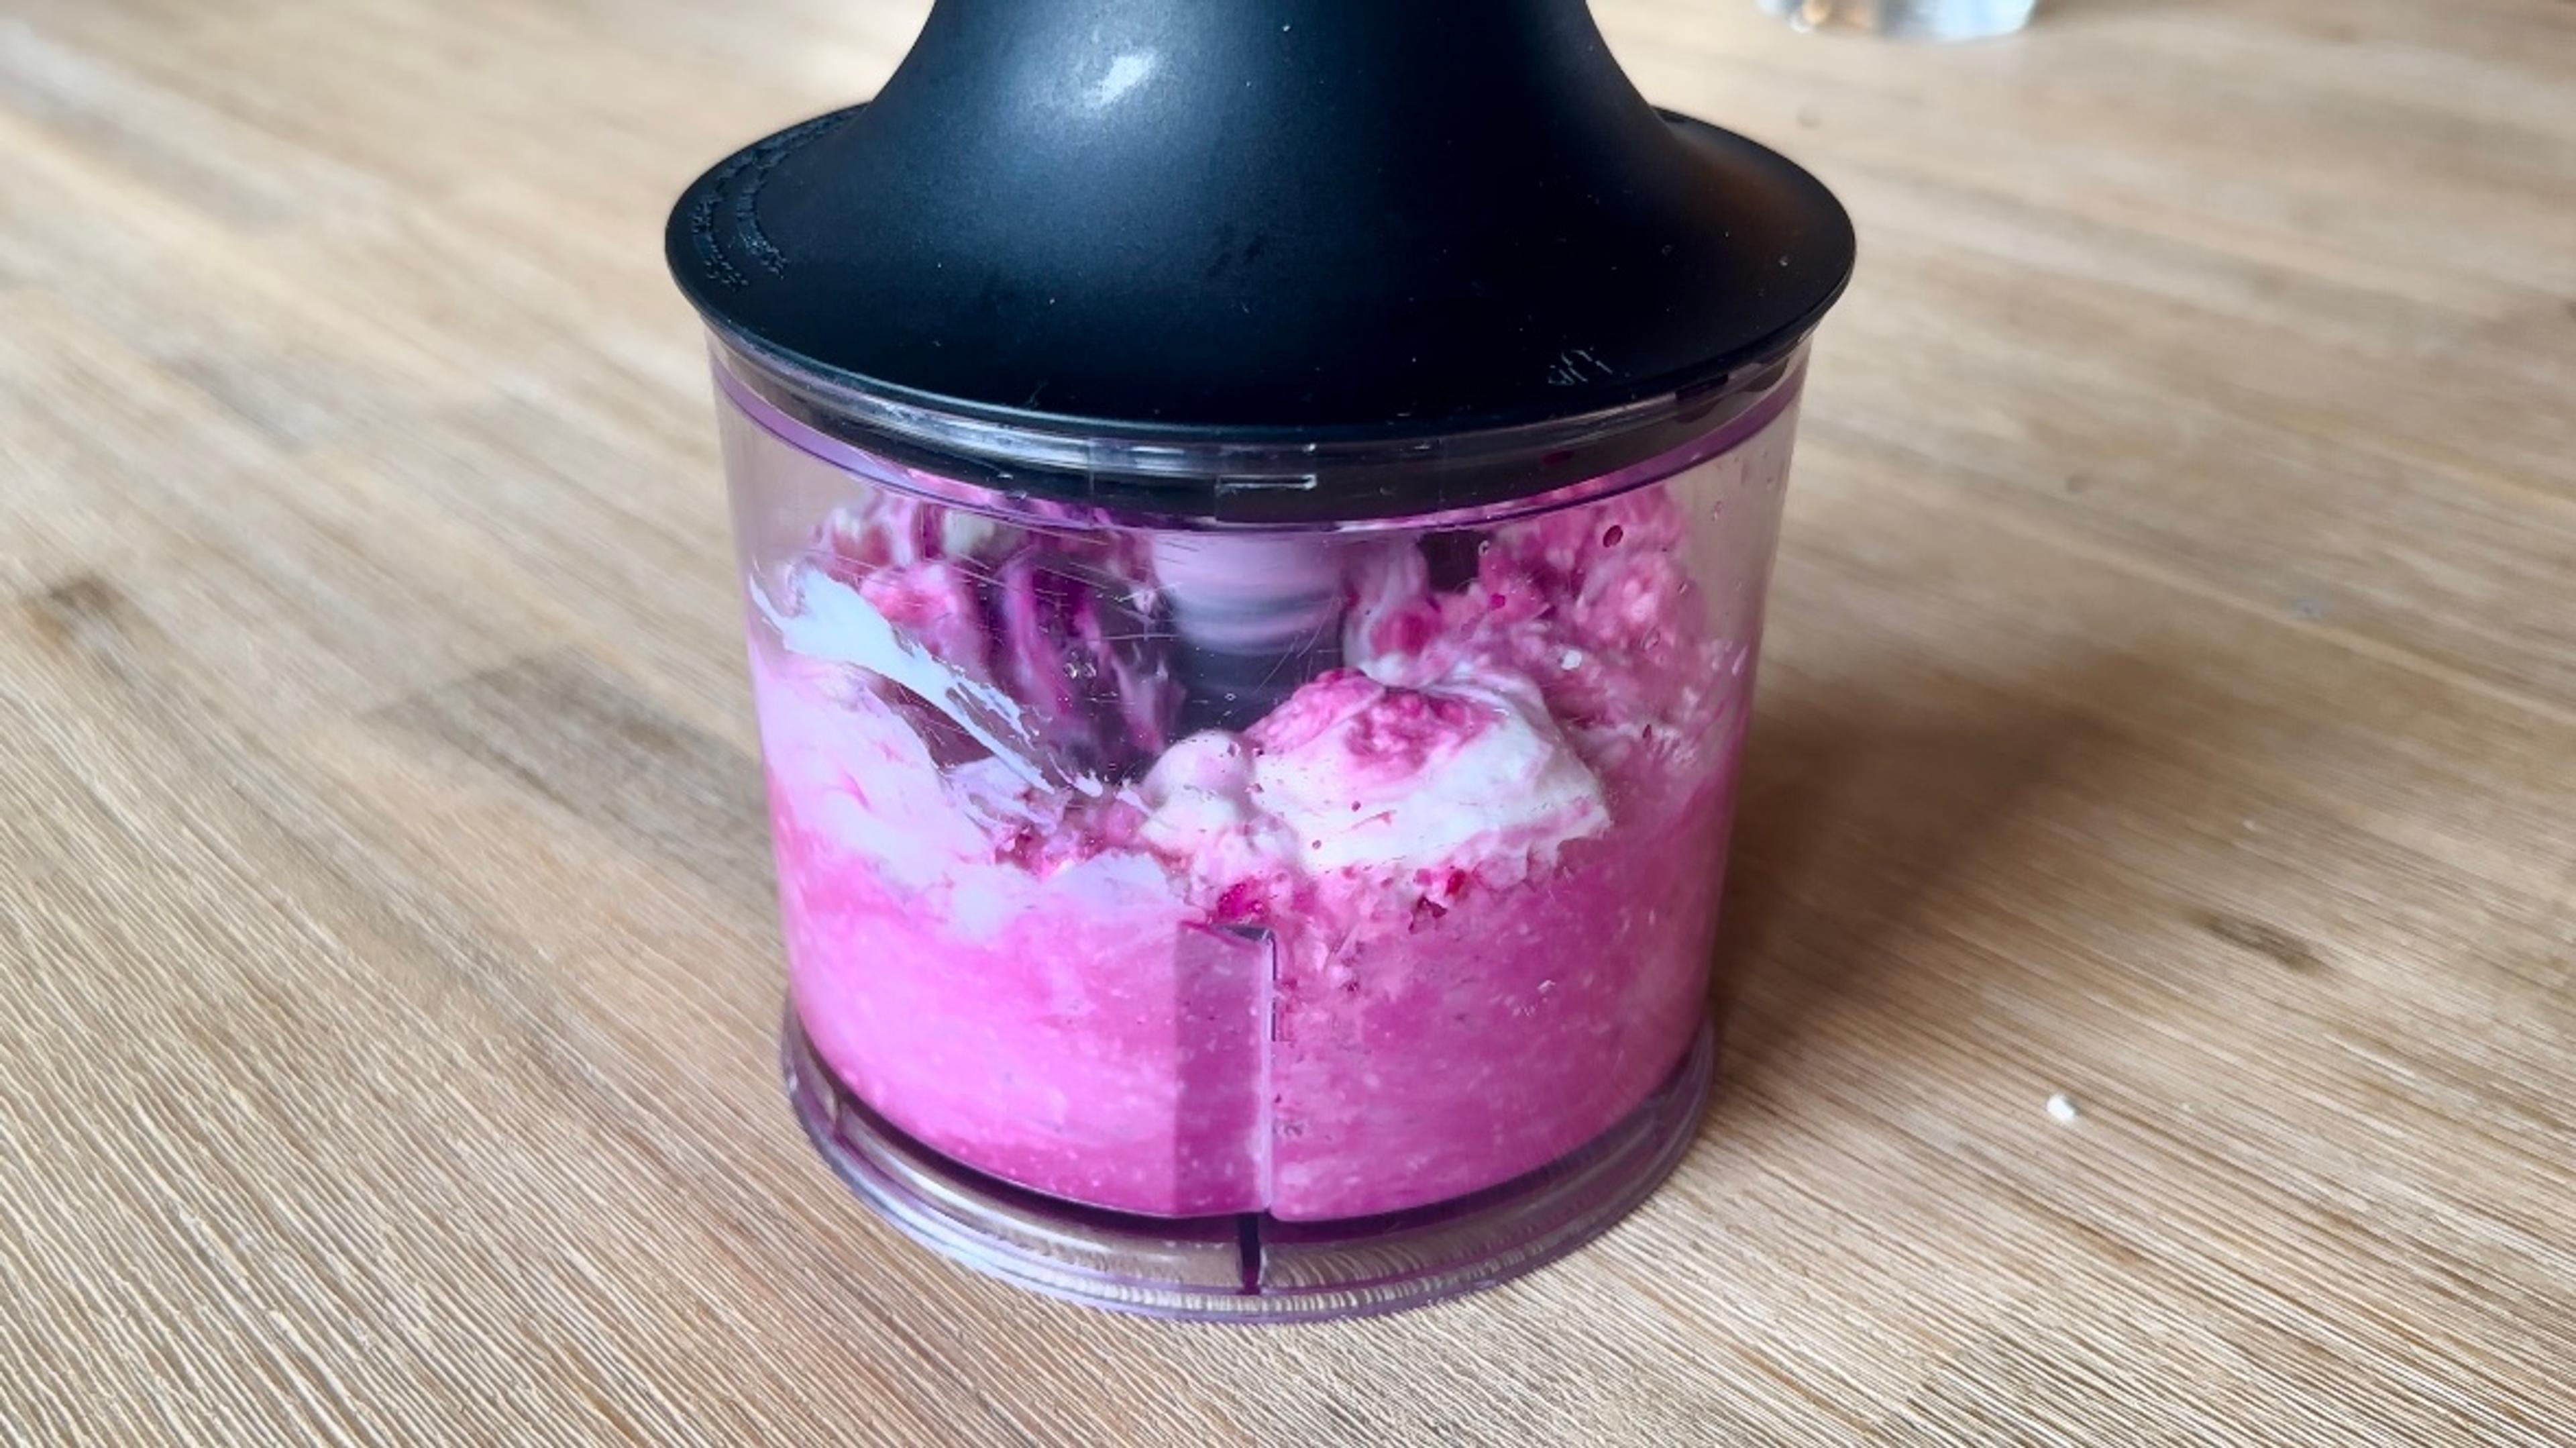 In a food processor or blender, add feta cheese, Greek yogurt, 2 roasted whole beets, beet juice, lemon juice, salt and pepper to taste. Add salt a little at a time since feta cheese is quite salty. Blend until smooth.